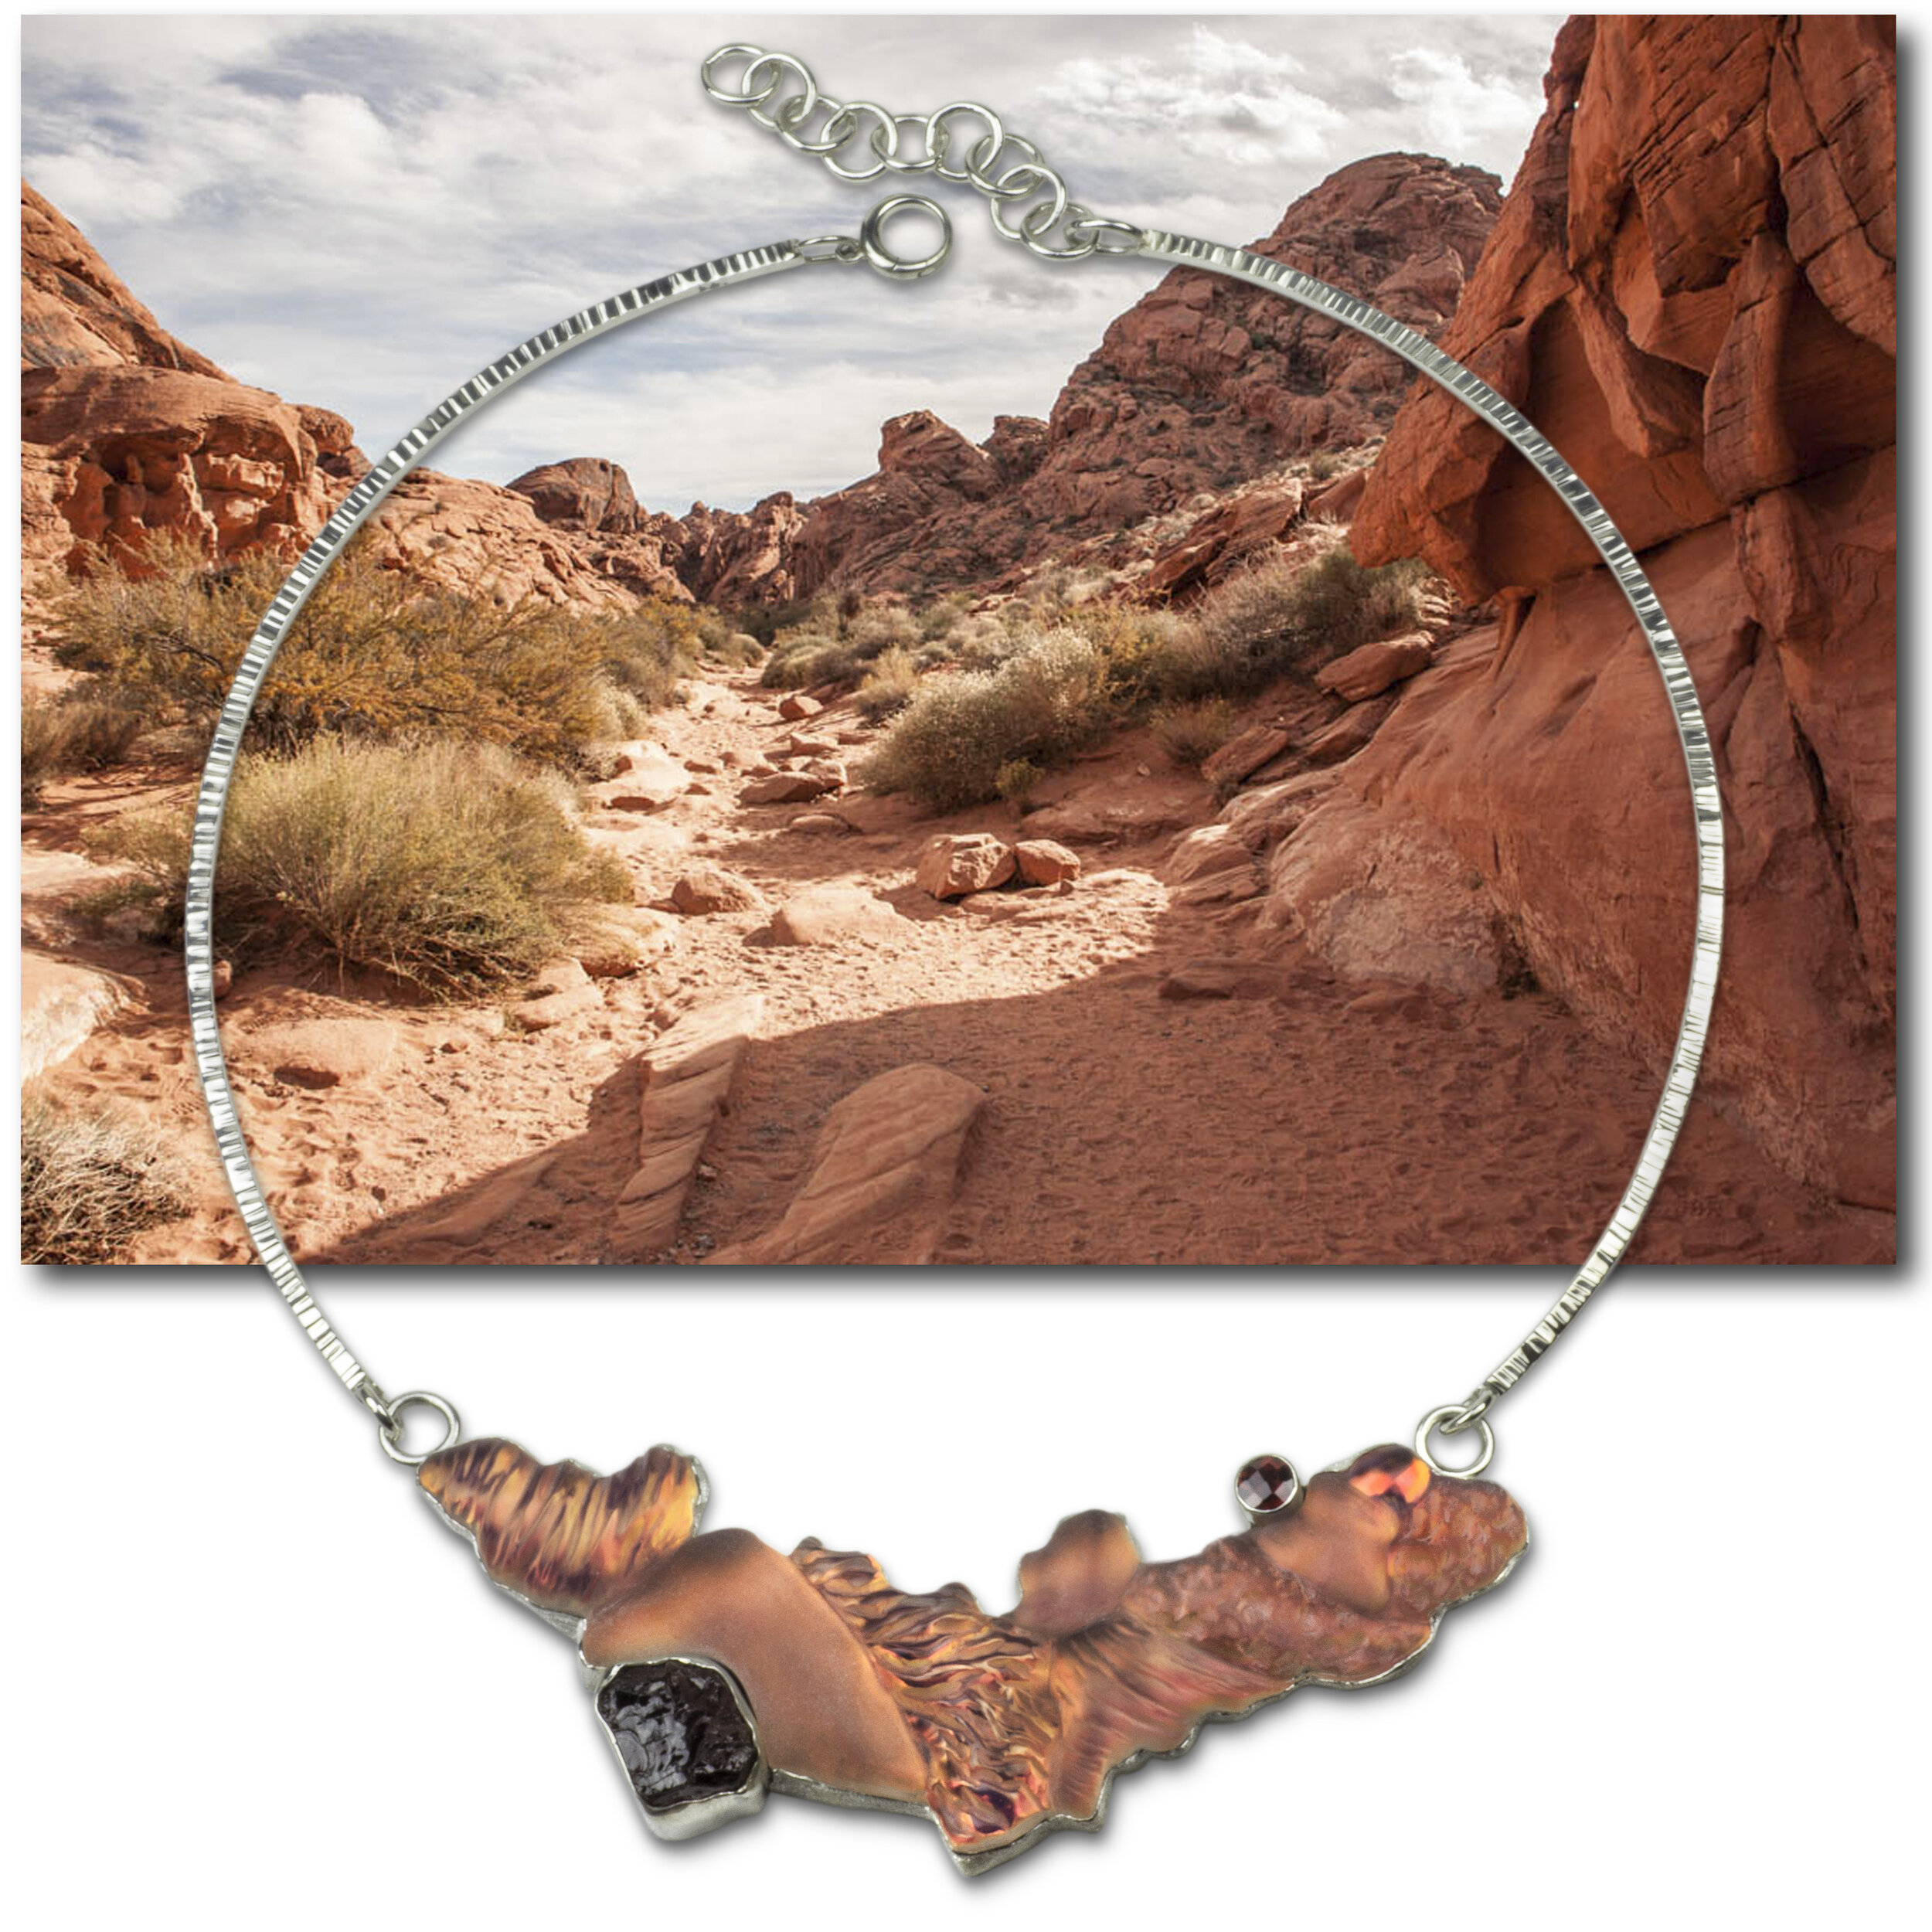 A finished necklace with the inspirational image accompanying it. 